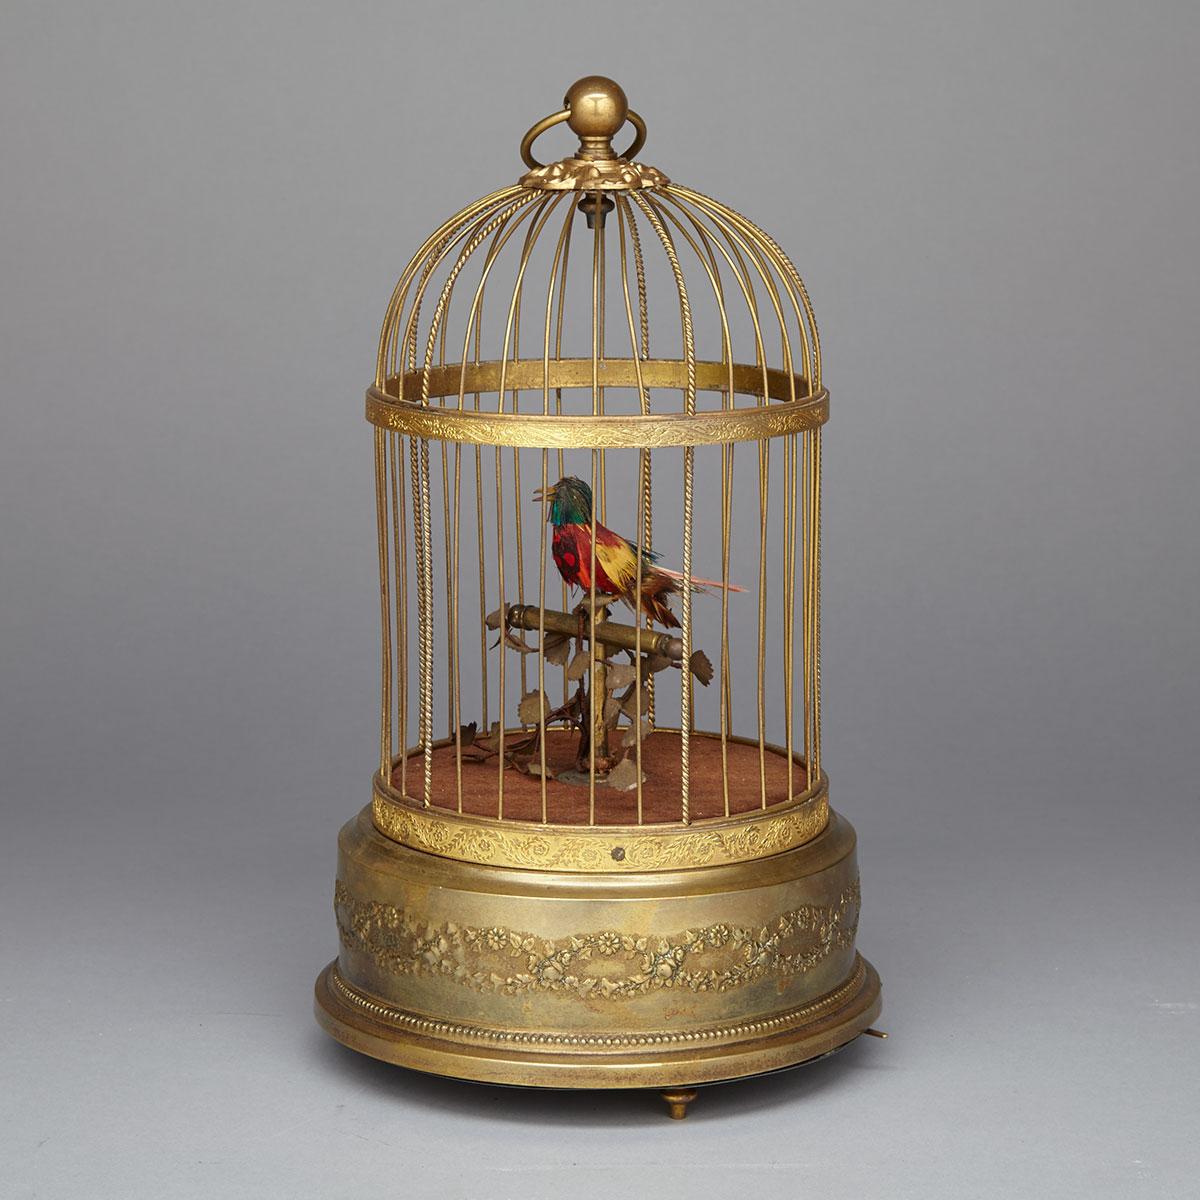 French Gilt Metal Caged Singing Bird Automaton, early 20th century